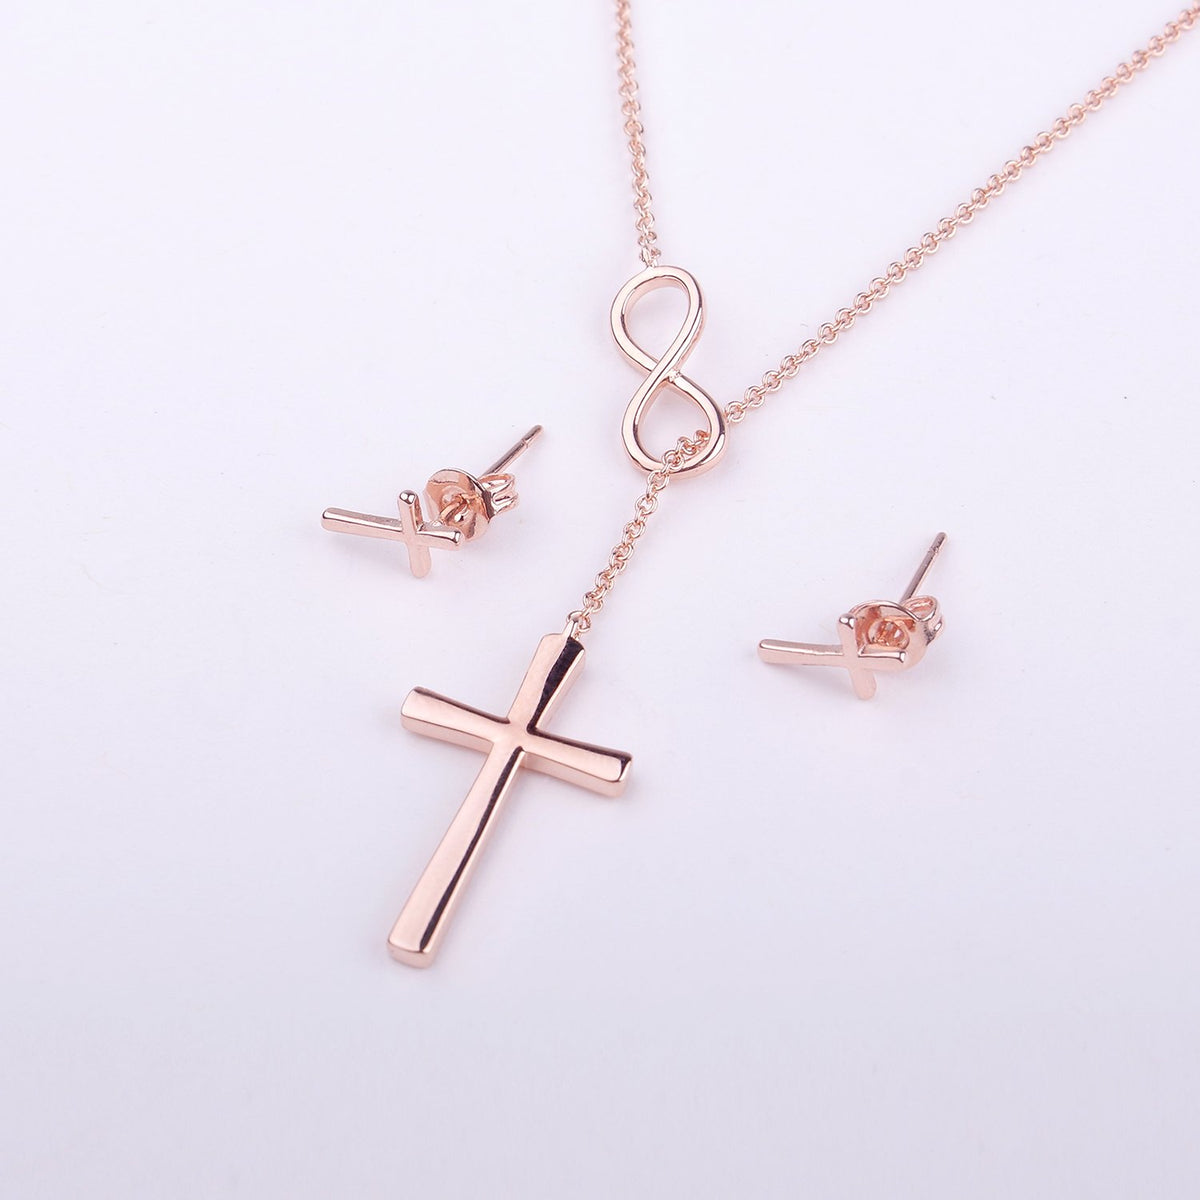 Christmas Gift for Girlfriend Cross earring and Necklace Set Jewelry Set